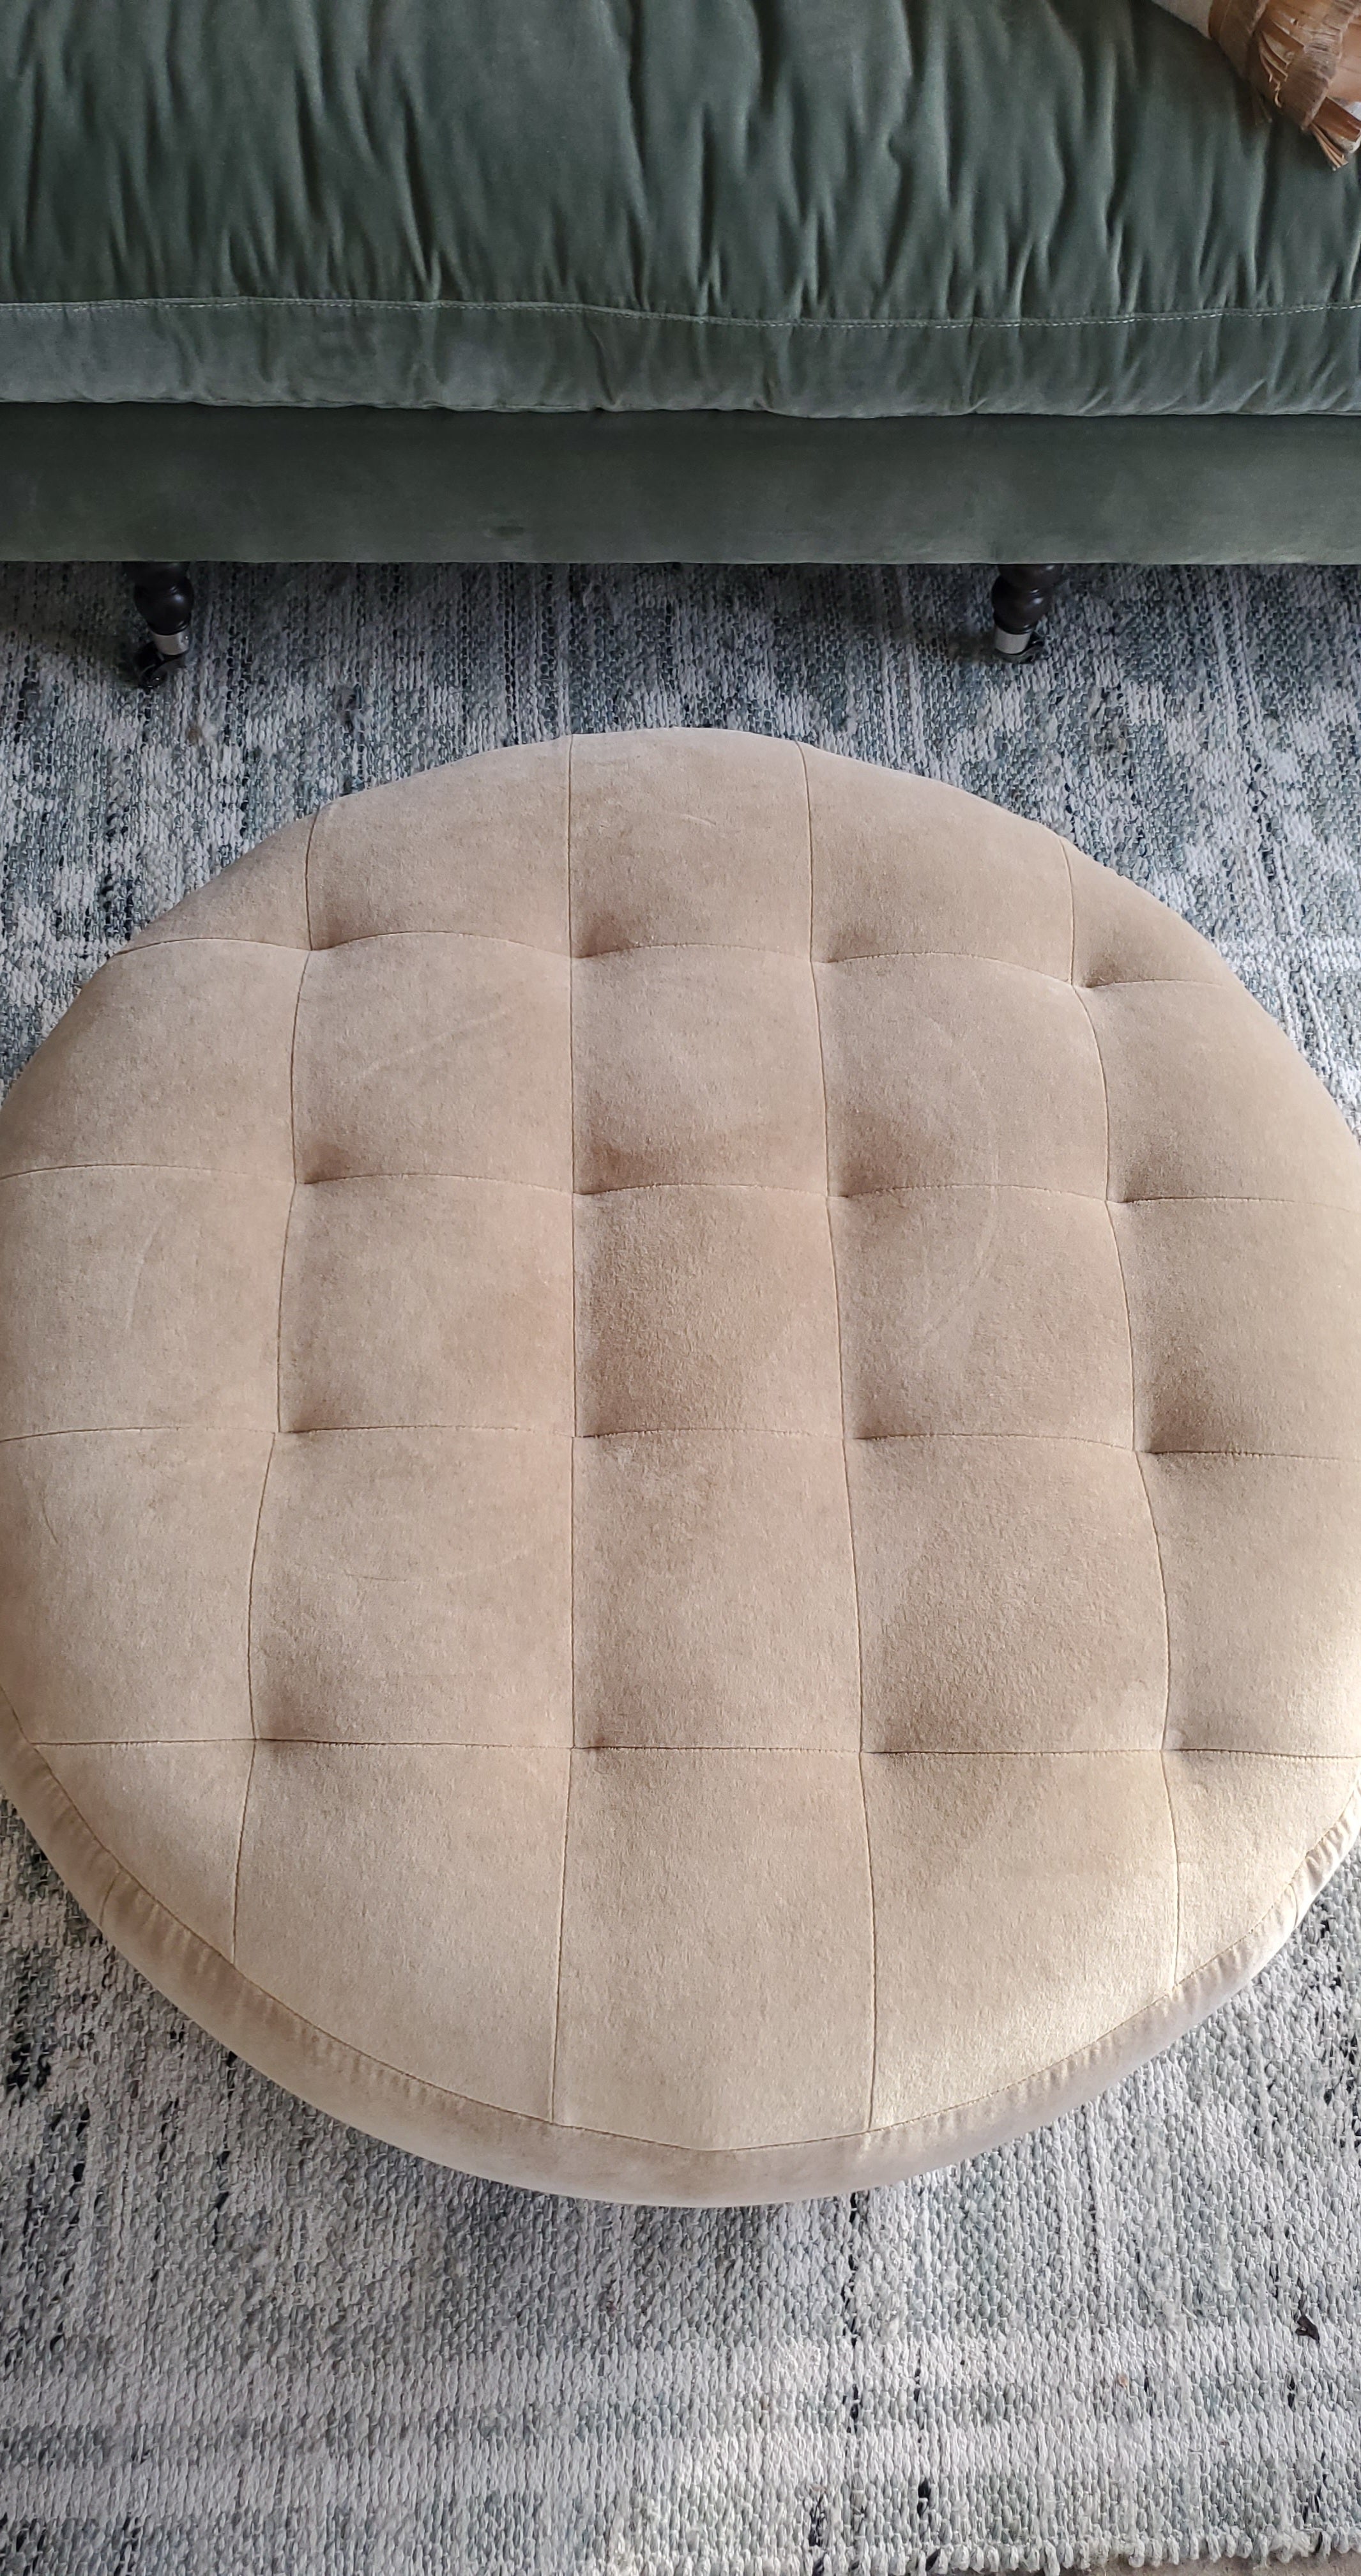 36" Upholstered Round Ottoman